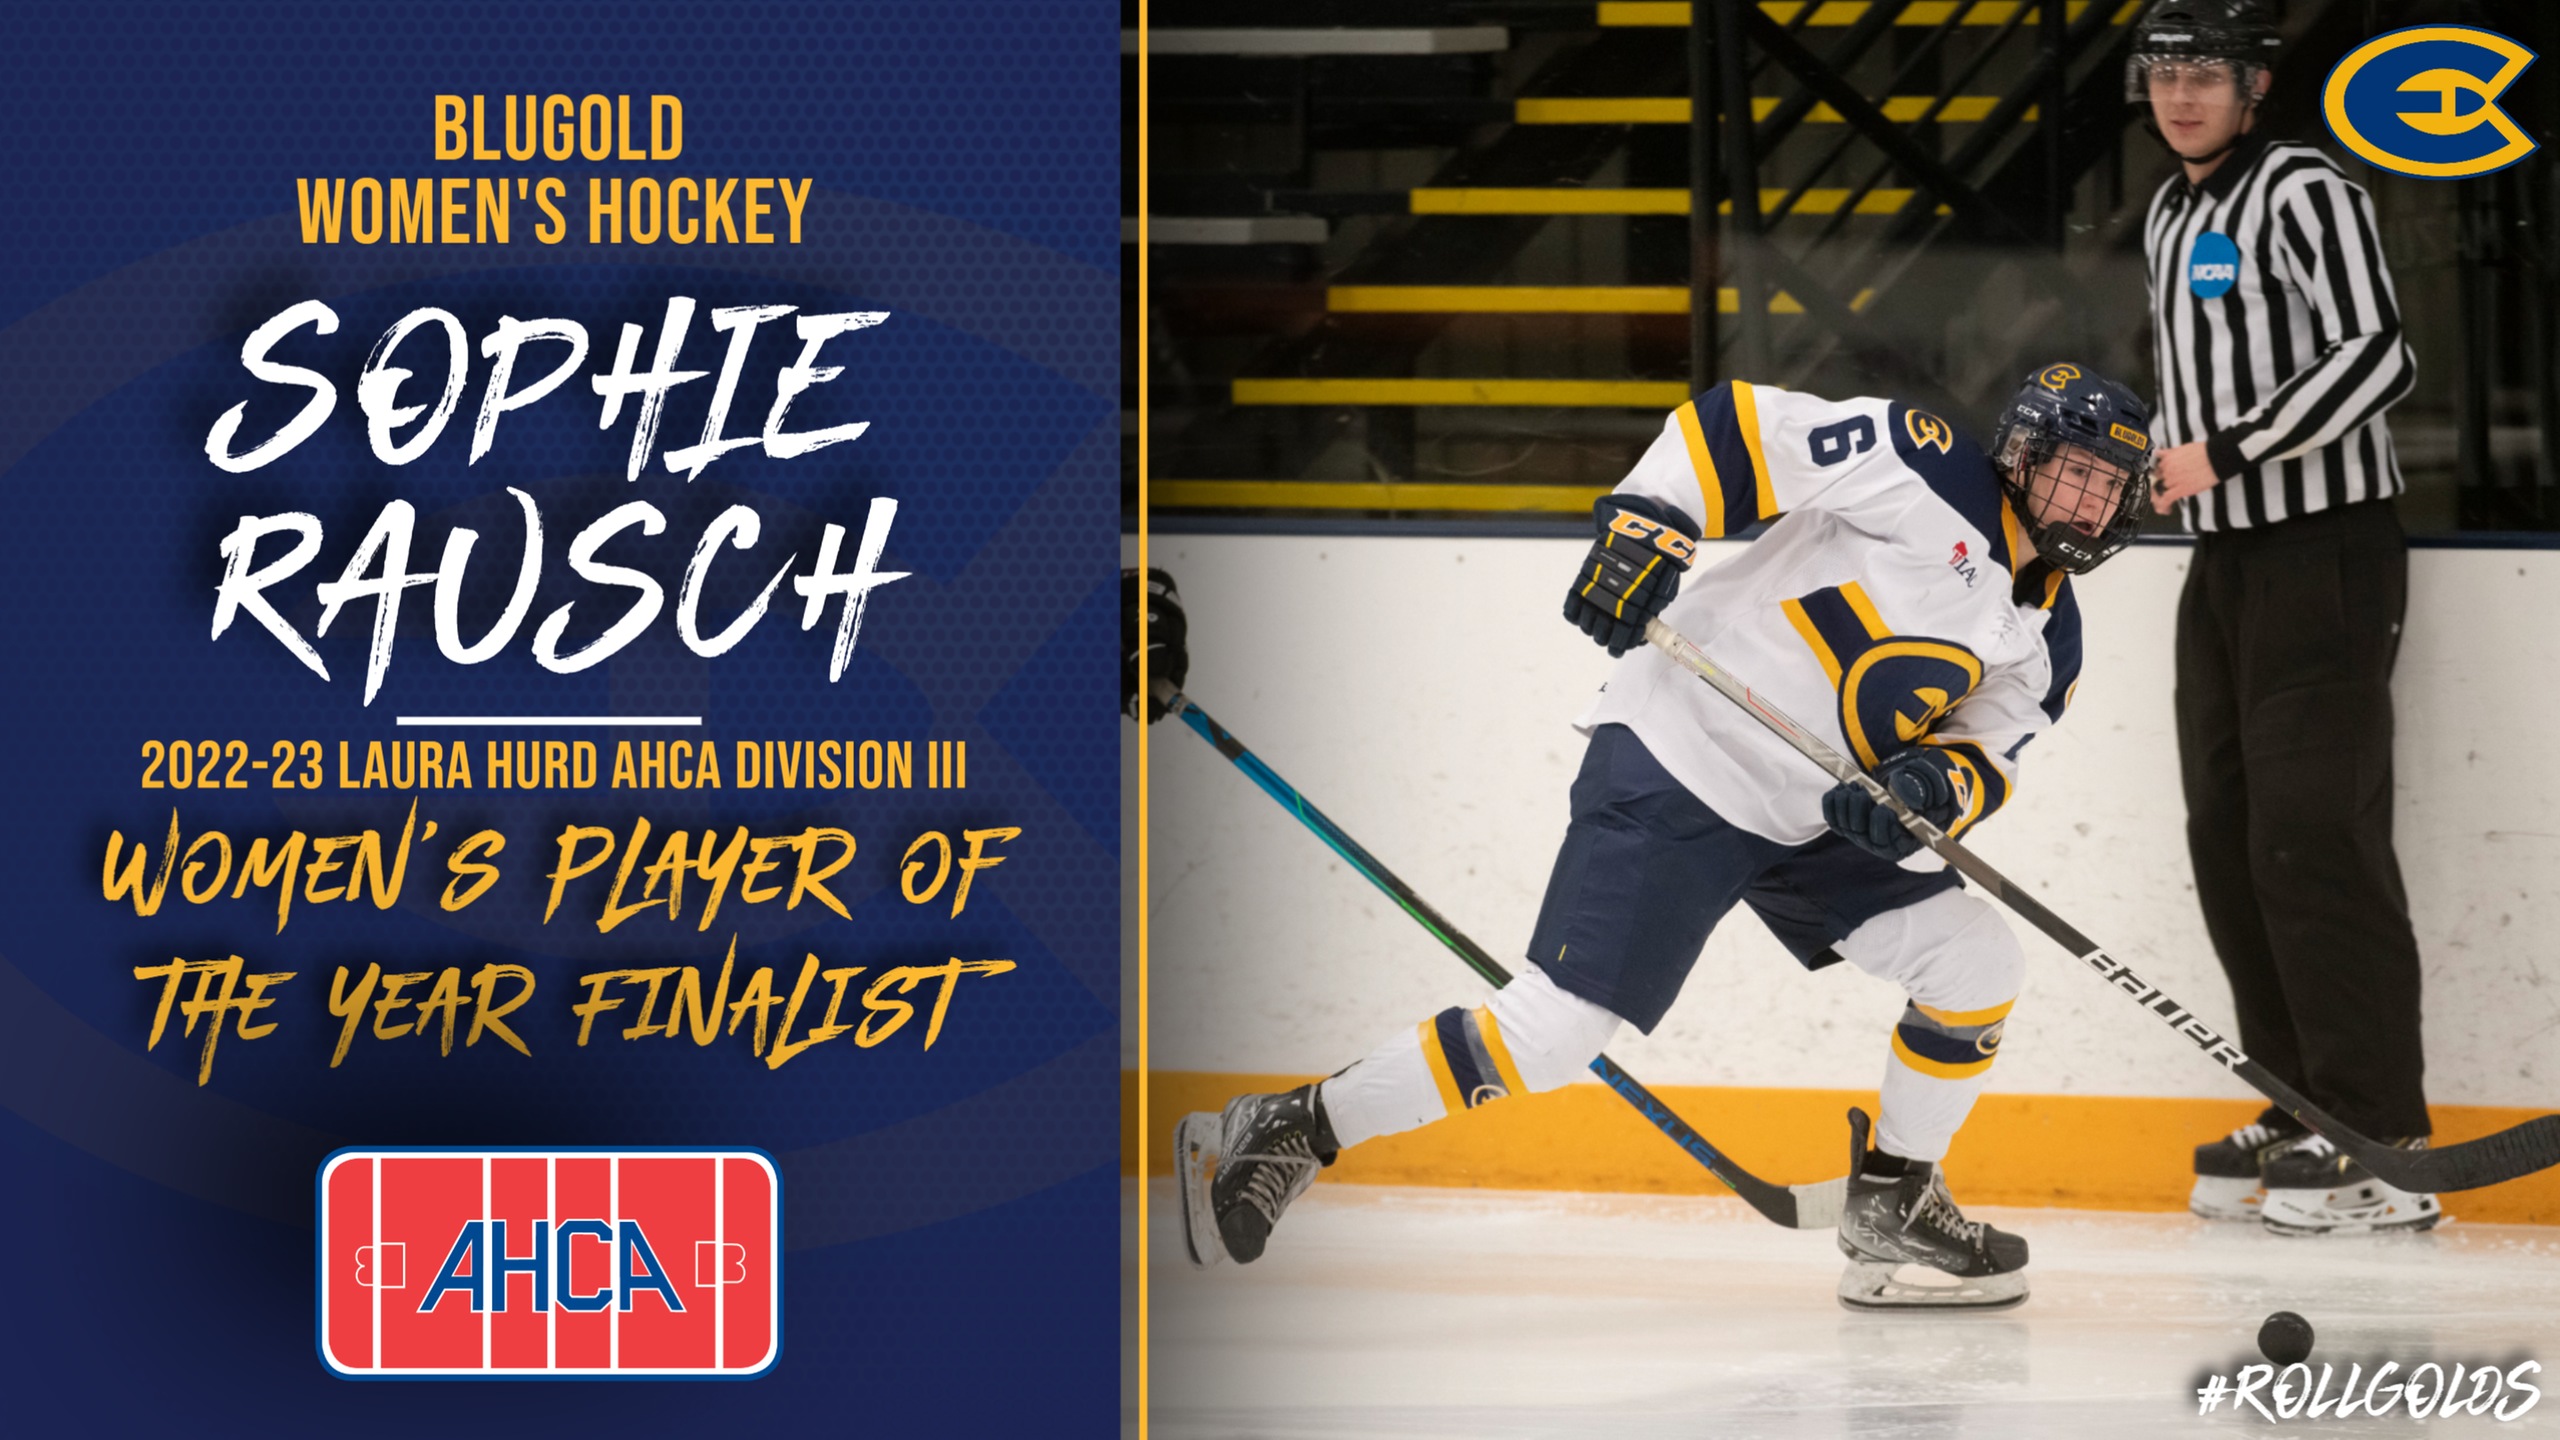 Rausch Named AHCA Laura Hurd Player of the Year Finalist